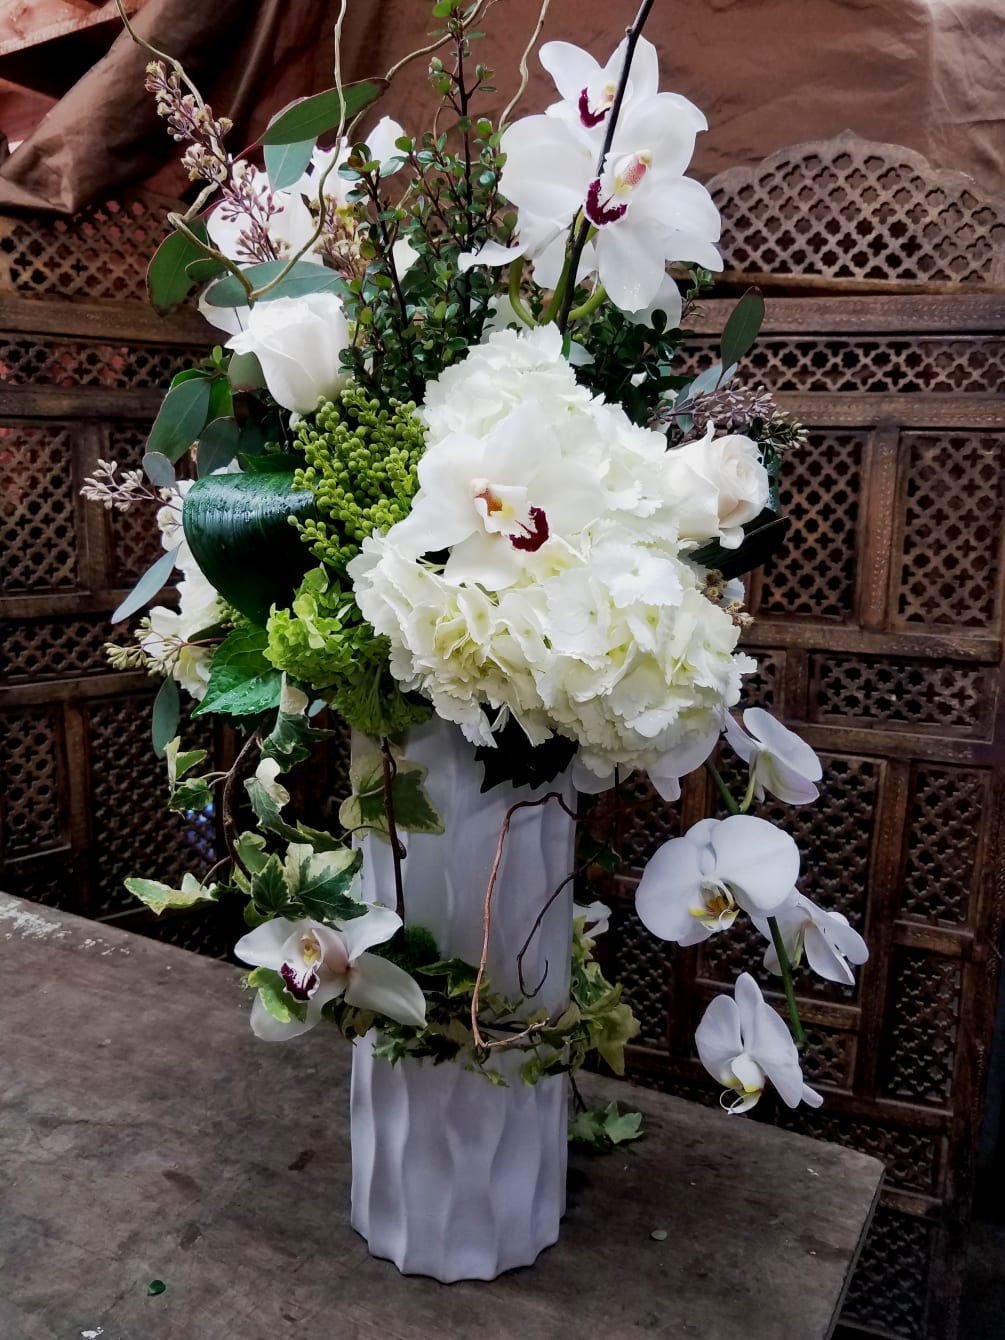 A taller arrangement which juxtaposes Cascading White Phaelenopsis Orchids with Rising Cymbidium